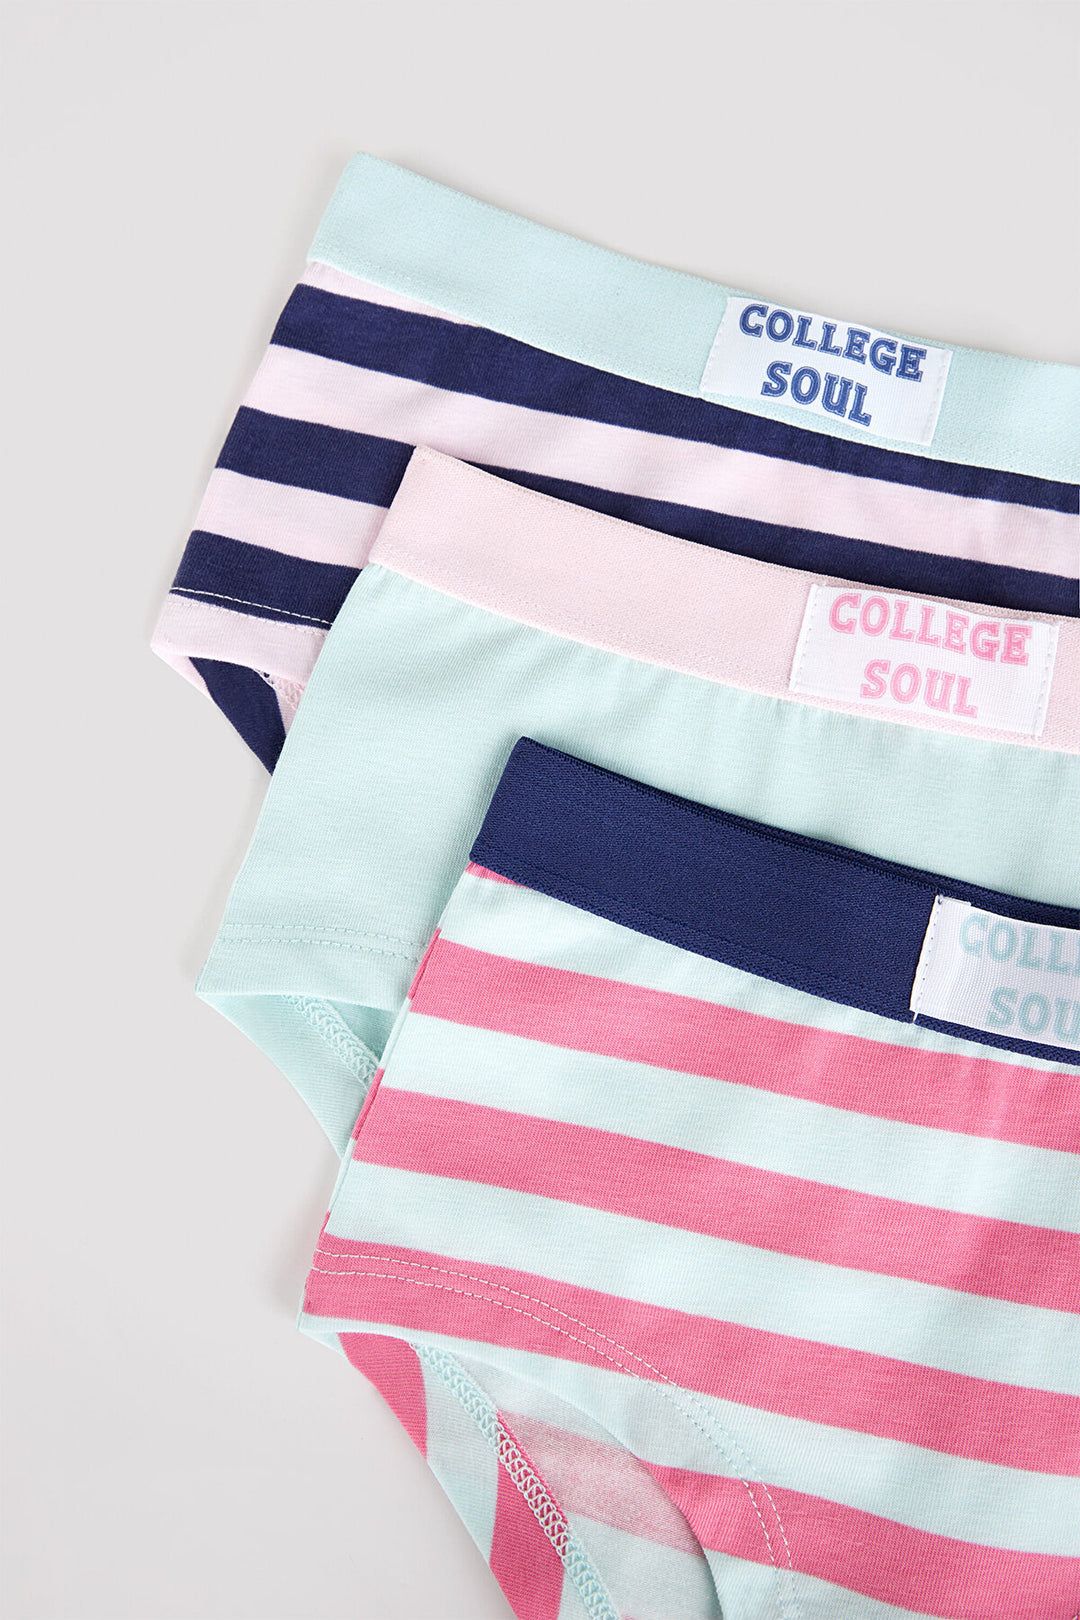 Girls College Soul 3 Pack Hipster